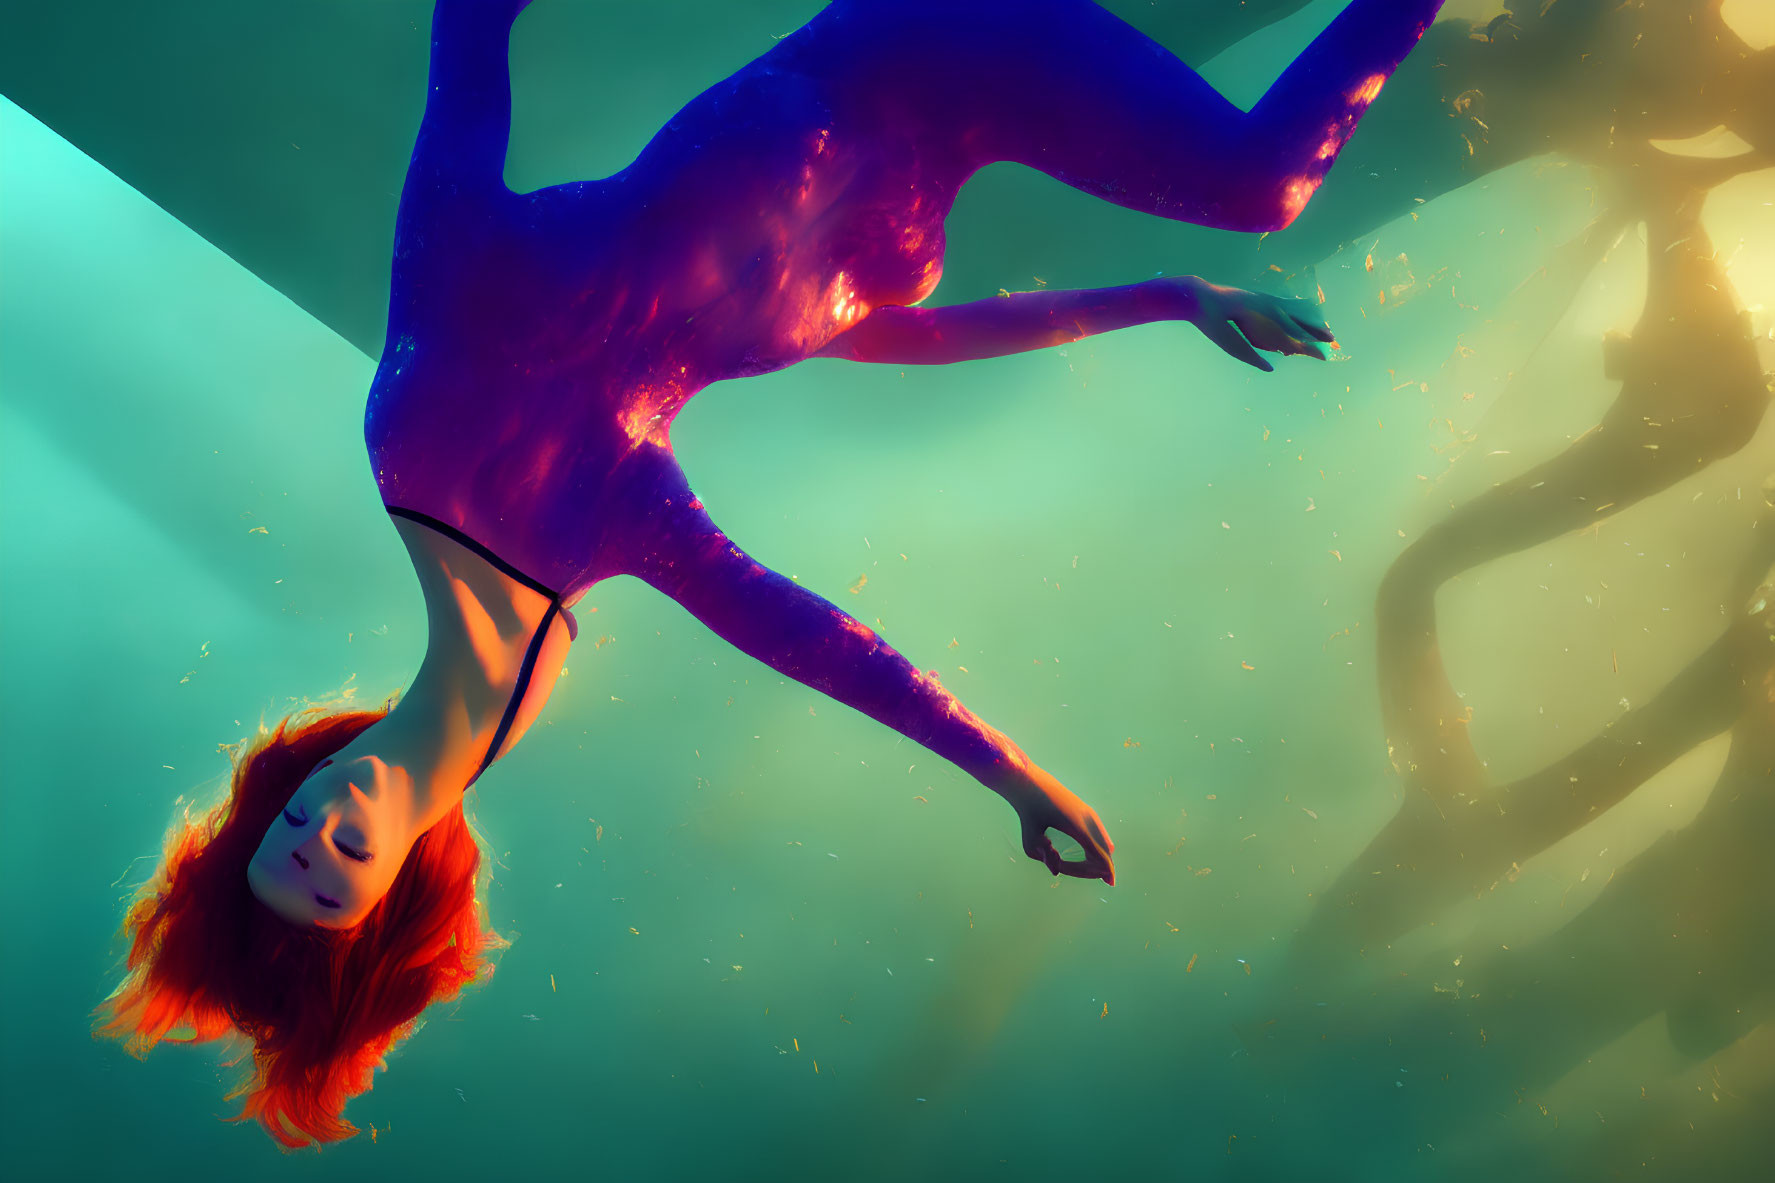 Red-haired person underwater in turquoise and orange light